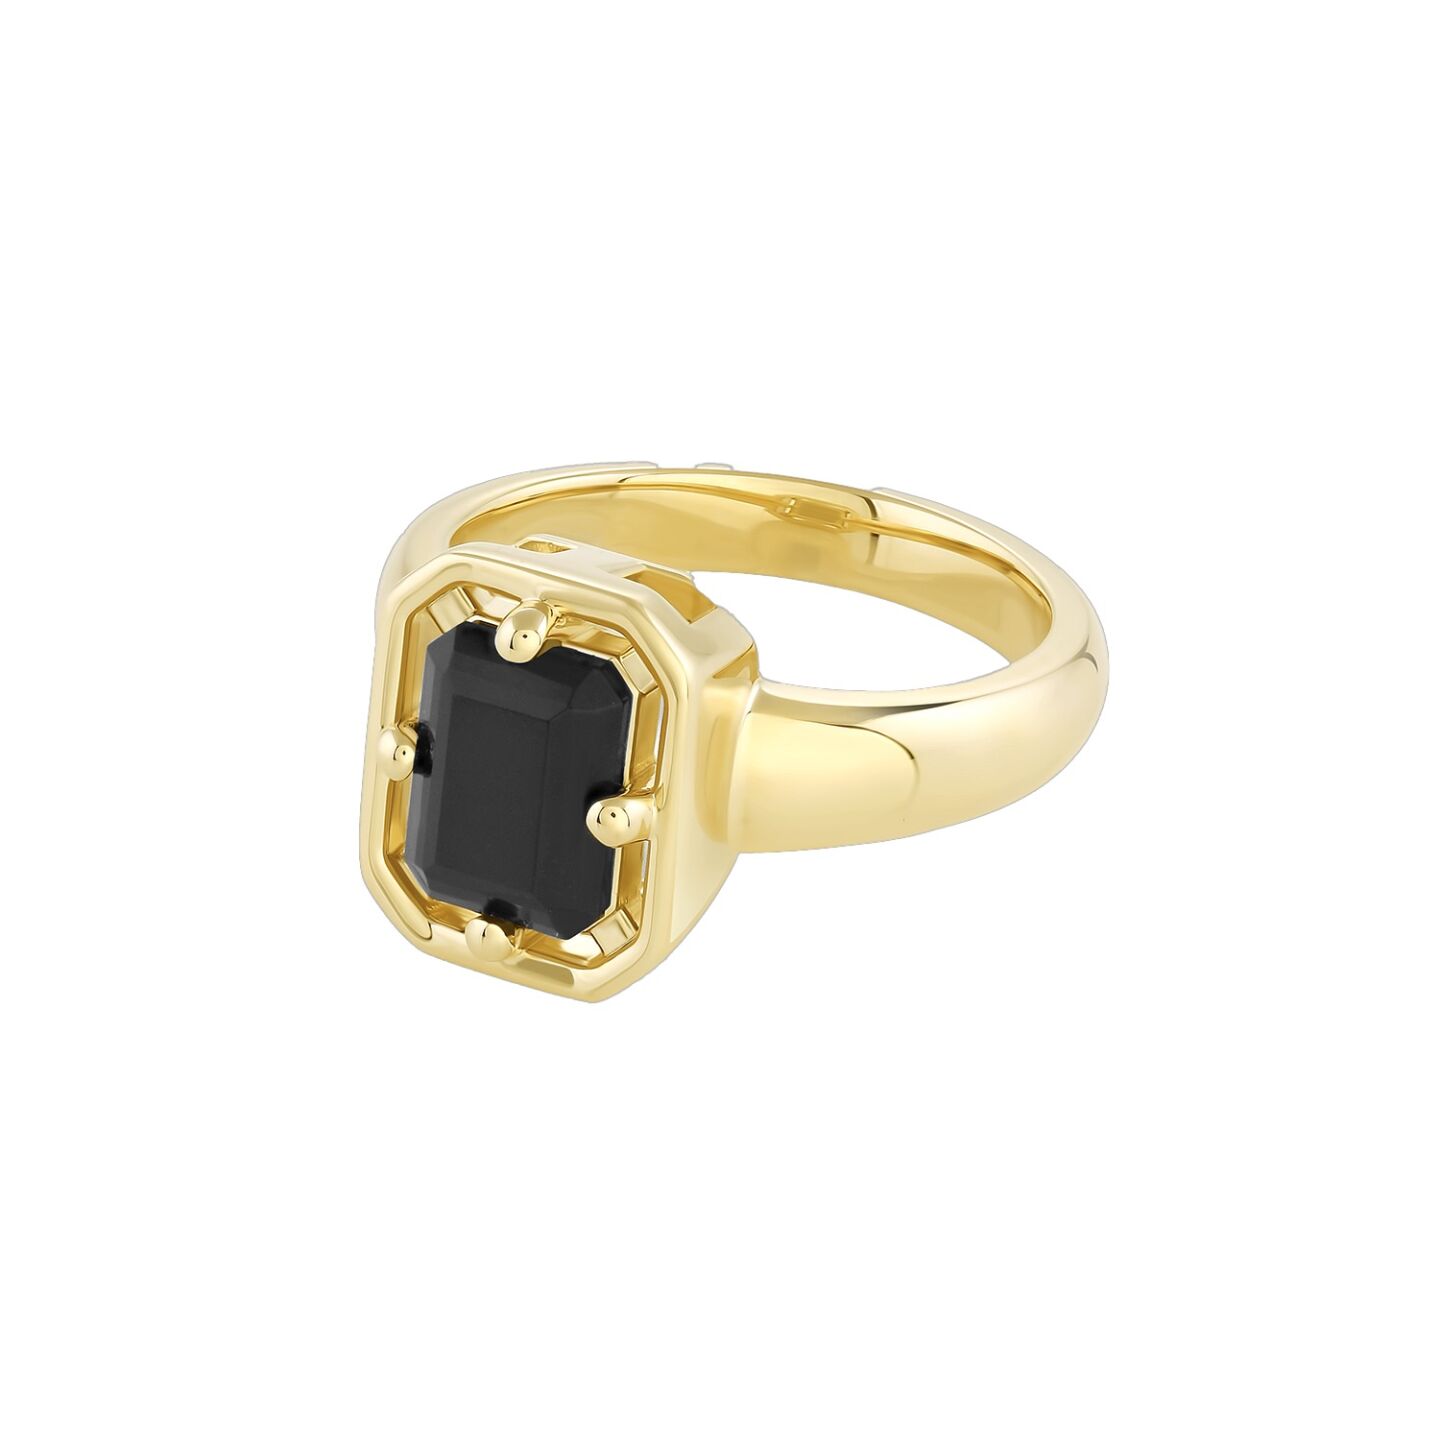 Gift Guide - Onyx ring